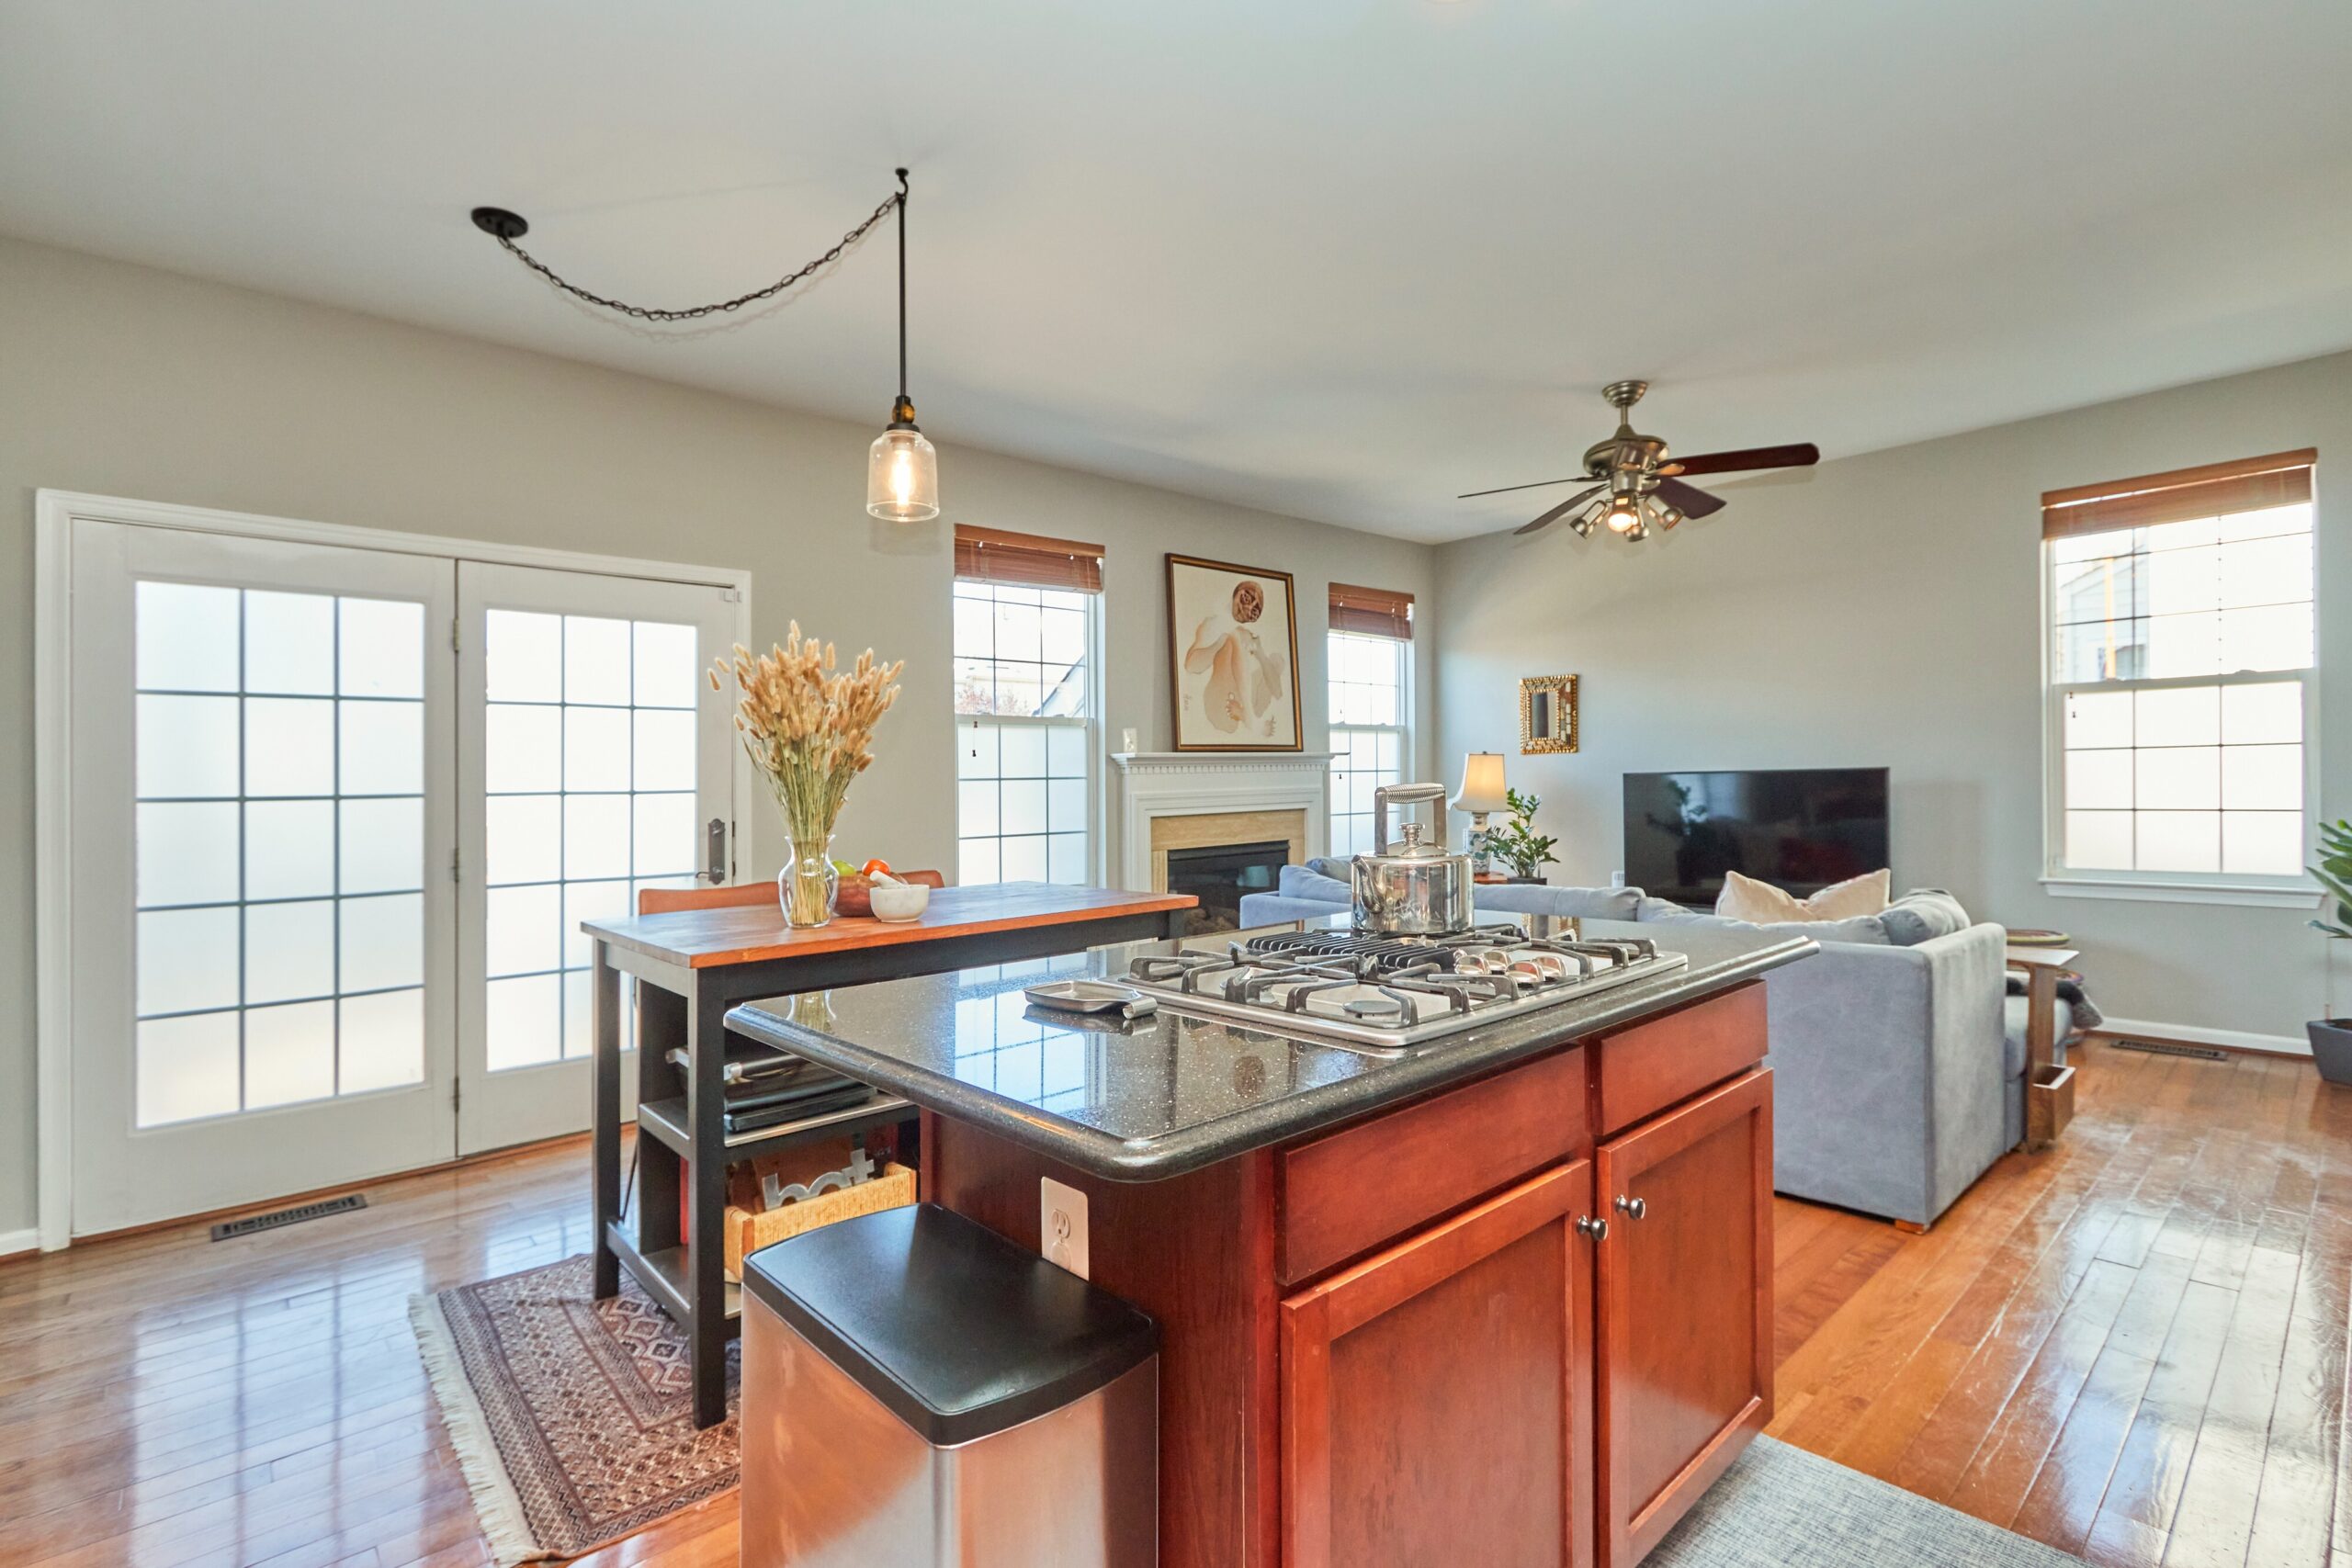 Professional interior photo of 25499 Beresford Drive, Chantilly, Virginia - showing the view when standing in the kitchen looking towards the family room area